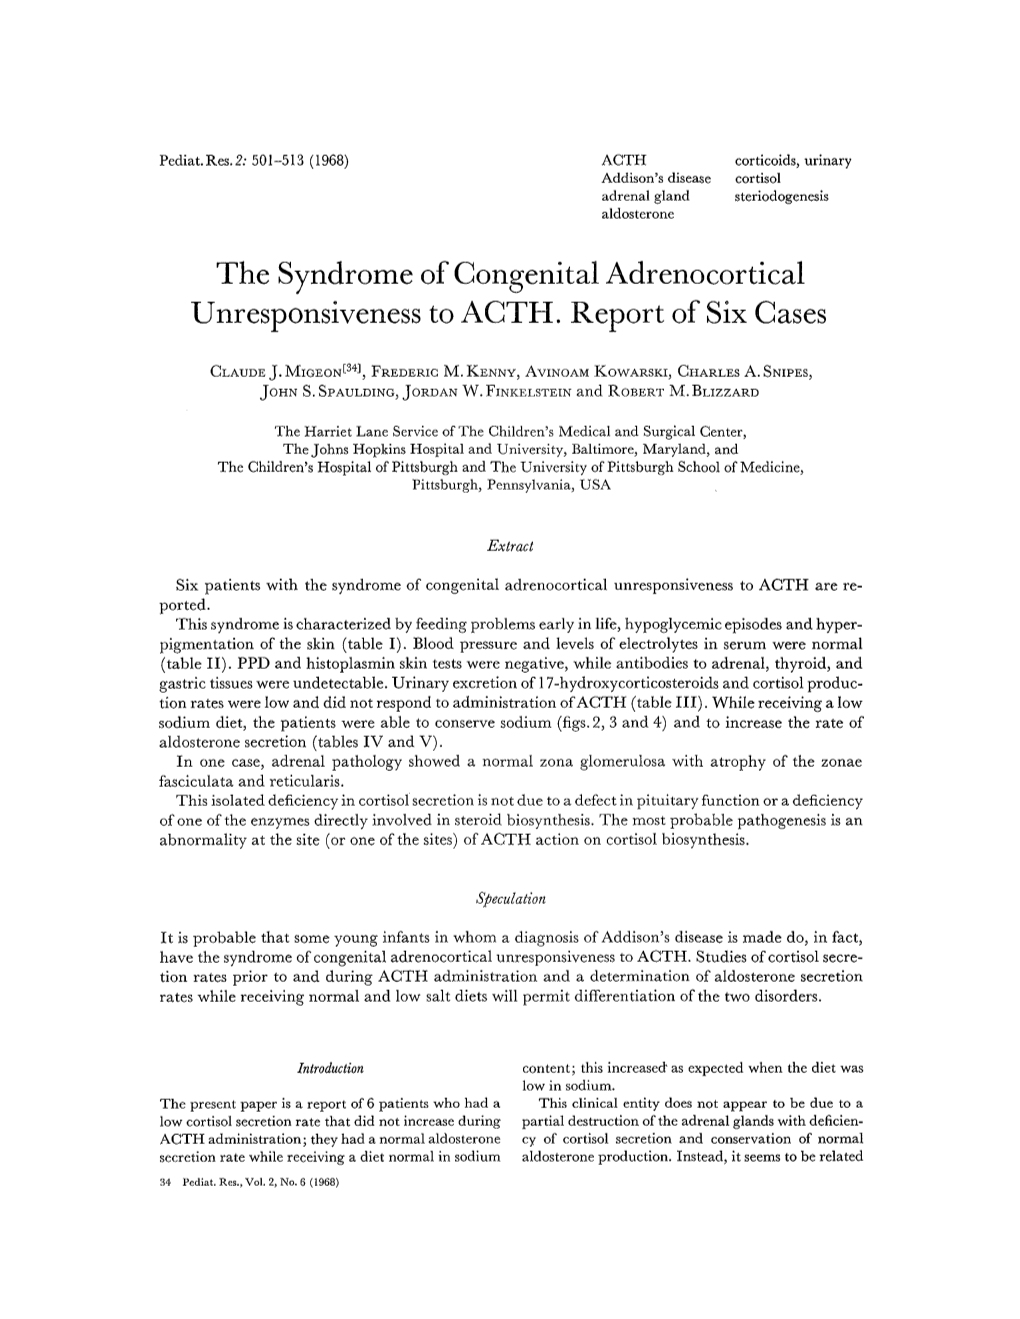 The Syndrome of Congenital Adrenocortical Unresponsiveness to AGTH